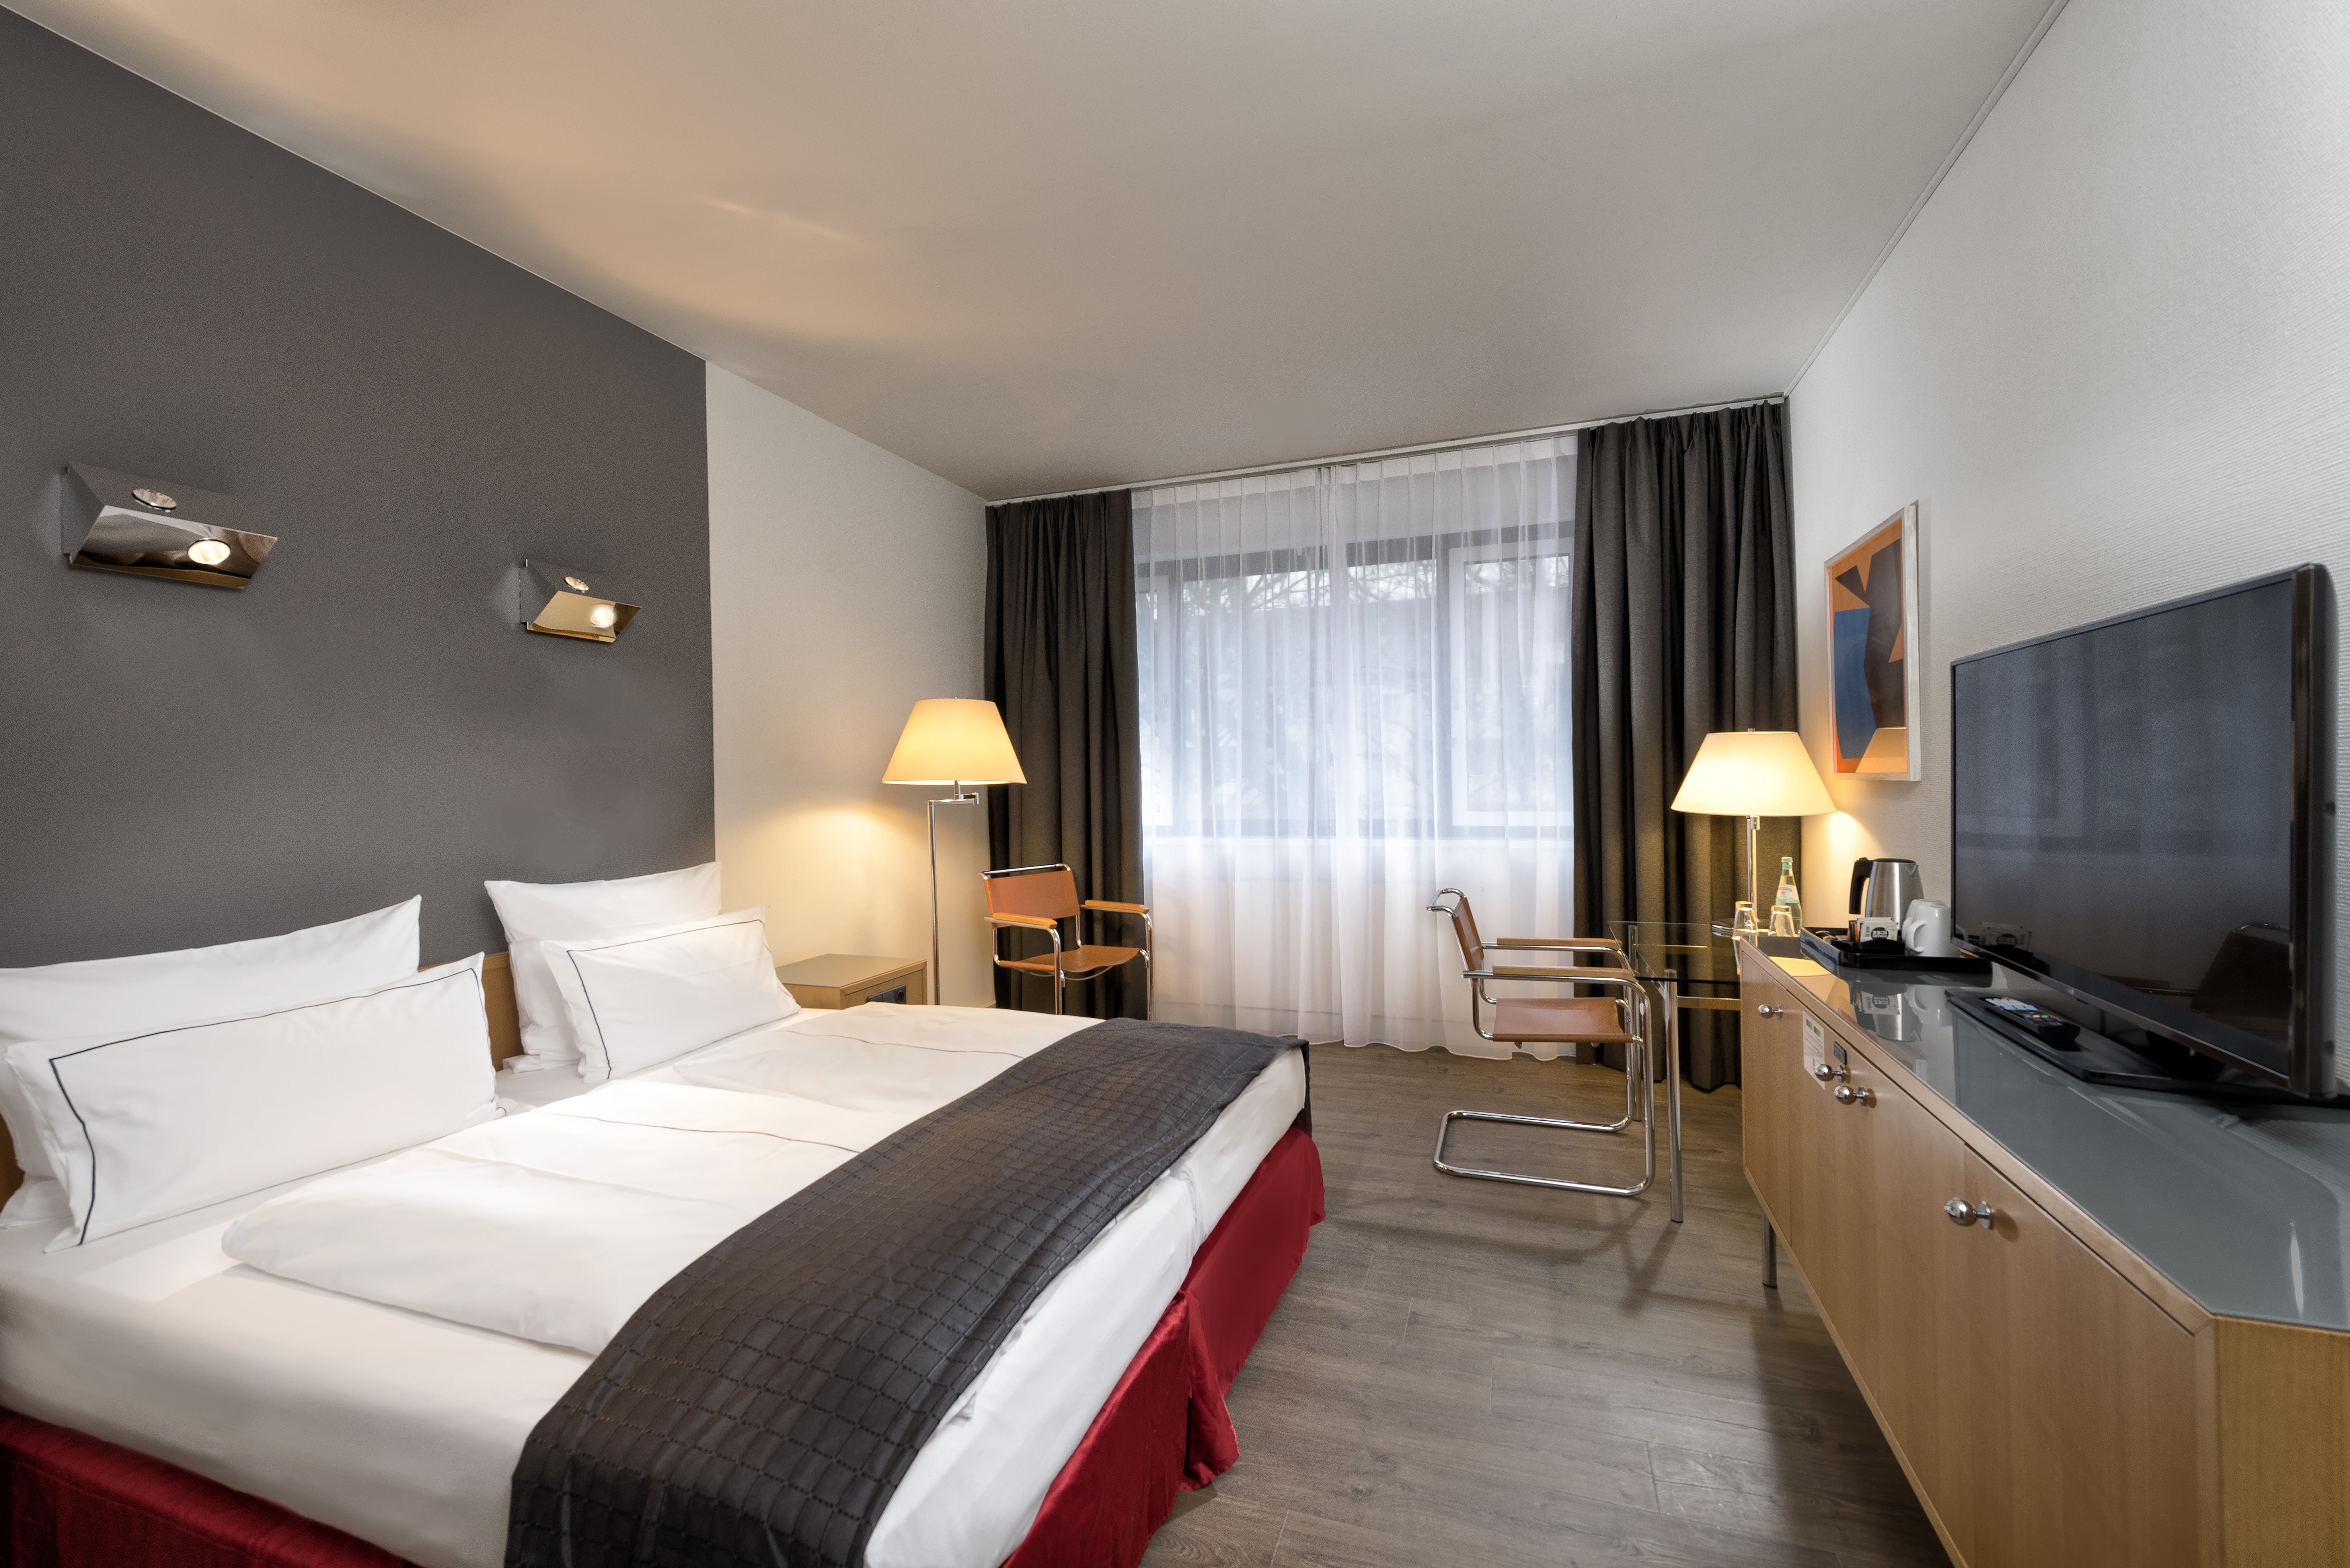 Holiday Inn Berlin City-West <br/>68.89 ew <br/> <a href='http://vakantieoplossing.nl/outpage/?id=a0689b4a44507a96e4bfbb791a1dc7bb' target='_blank'>View Details</a>